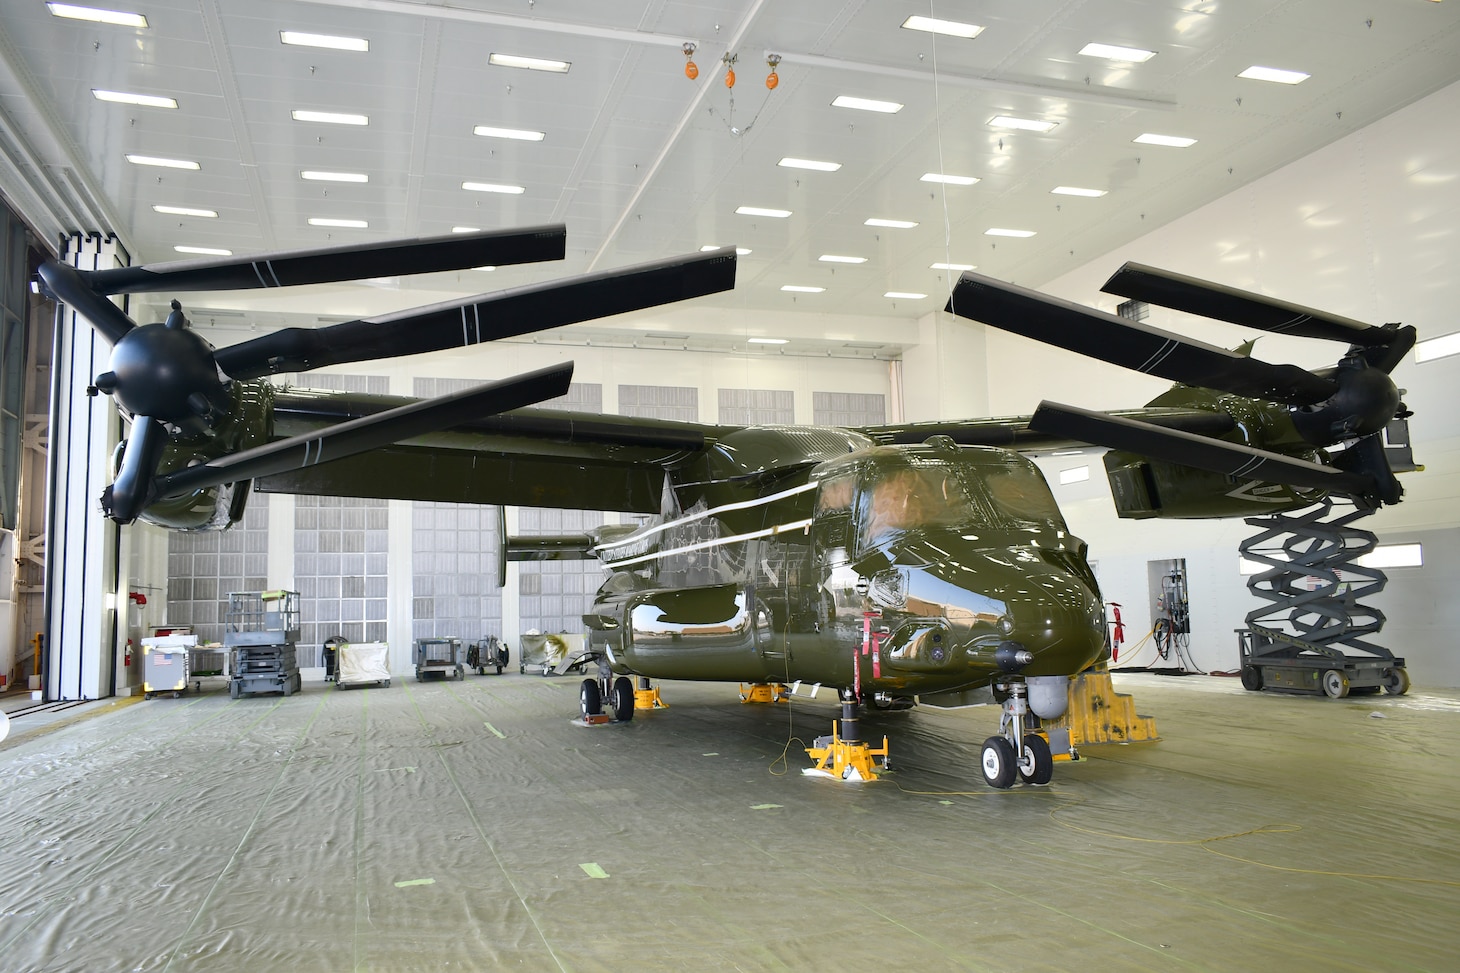 A newly painted aircraft sits in a hangar